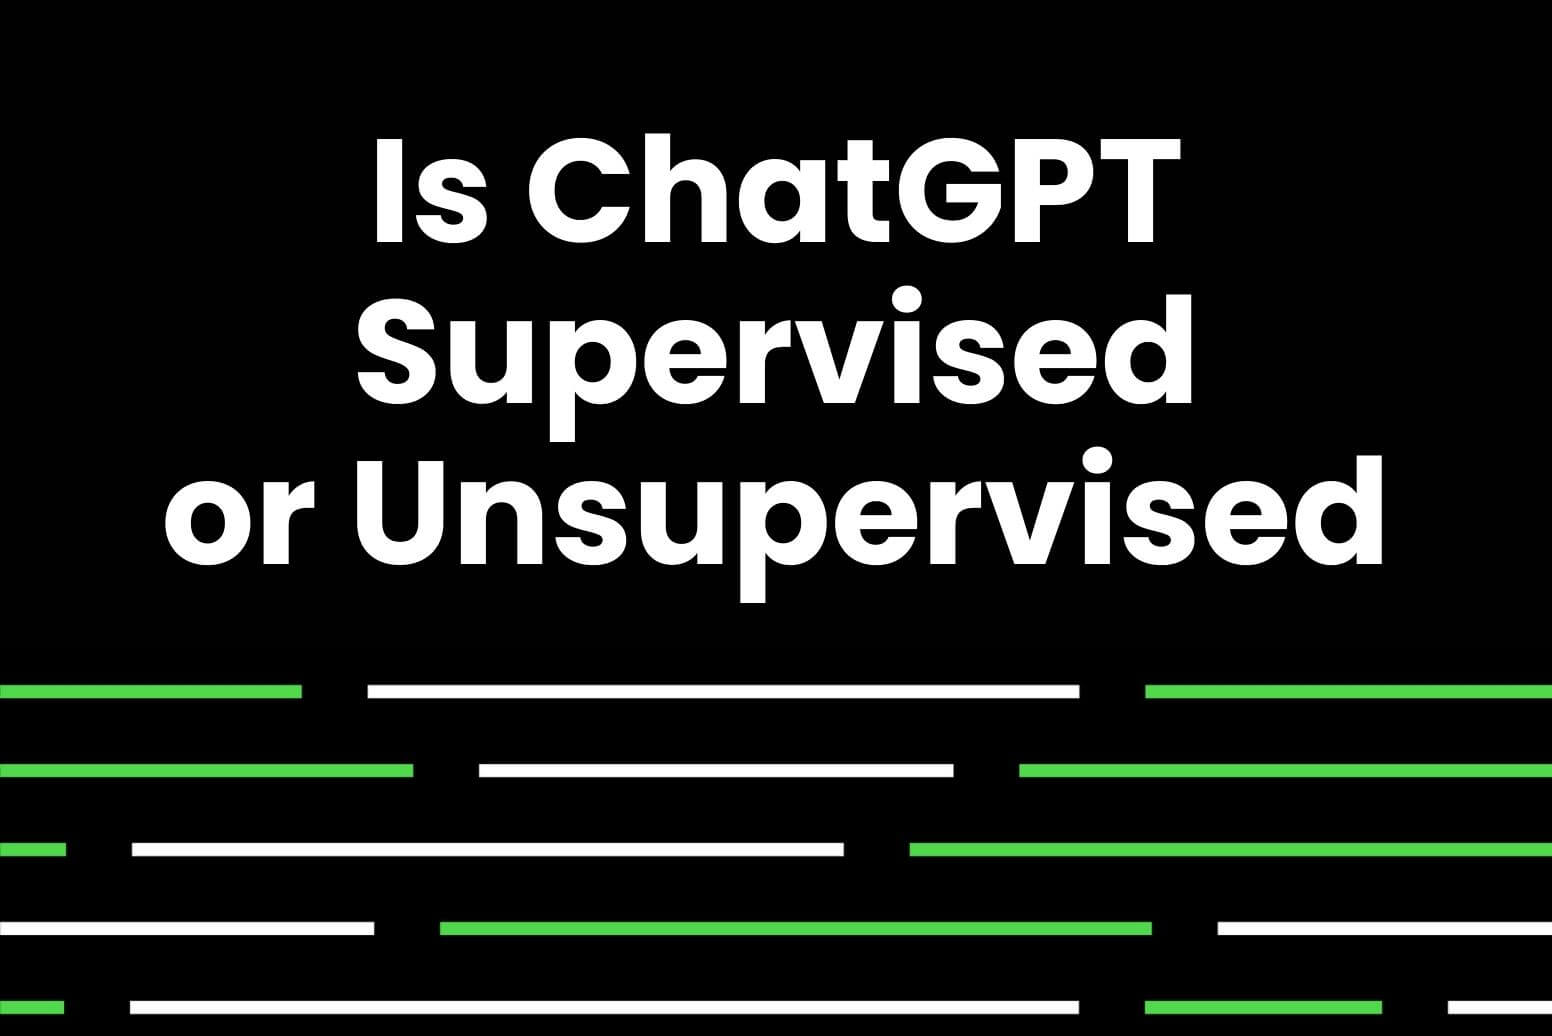 Is ChatGPT supervised or unsupervised